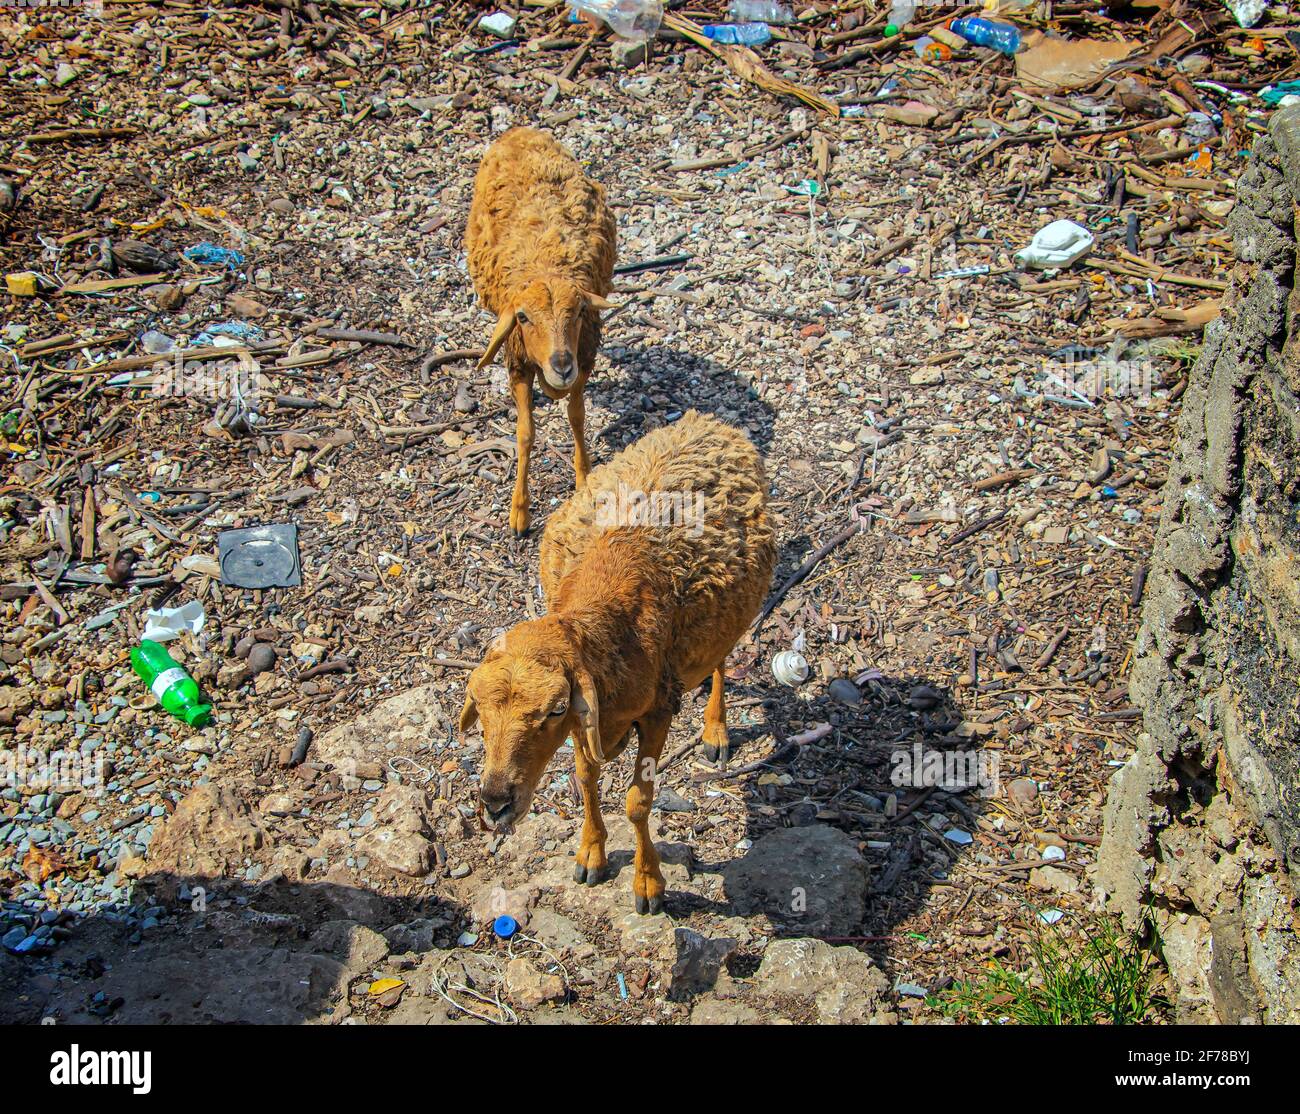 Two sheep on a pile of garbage floating by the sea on Wasini island, Kenya. It is a typical image for Africa. Stock Photo